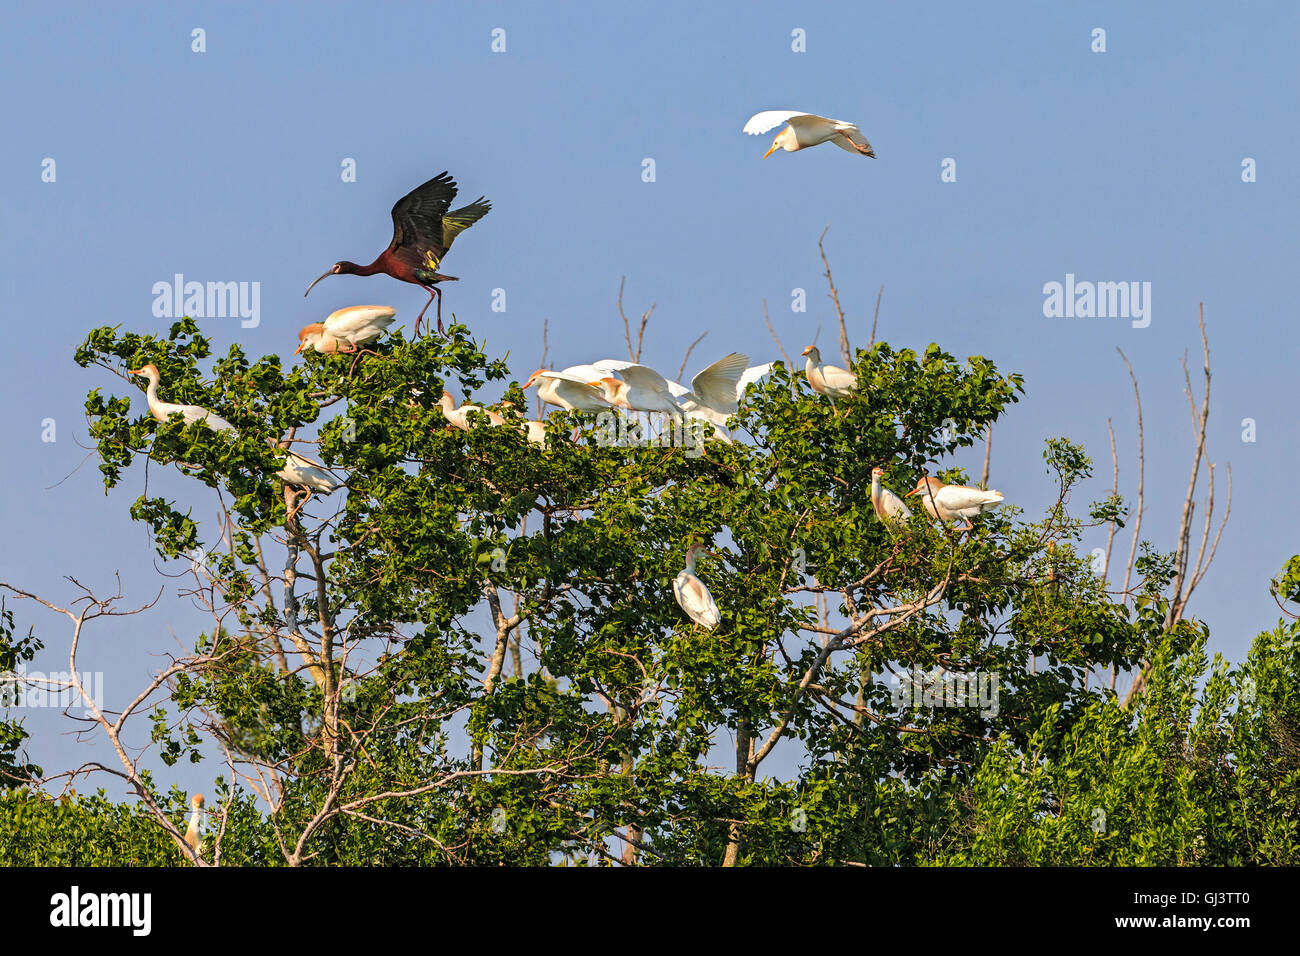 Cattle egrets and a glossy Ibis flying during a windy day. The cattle egret is a stocky heron. Stock Photo